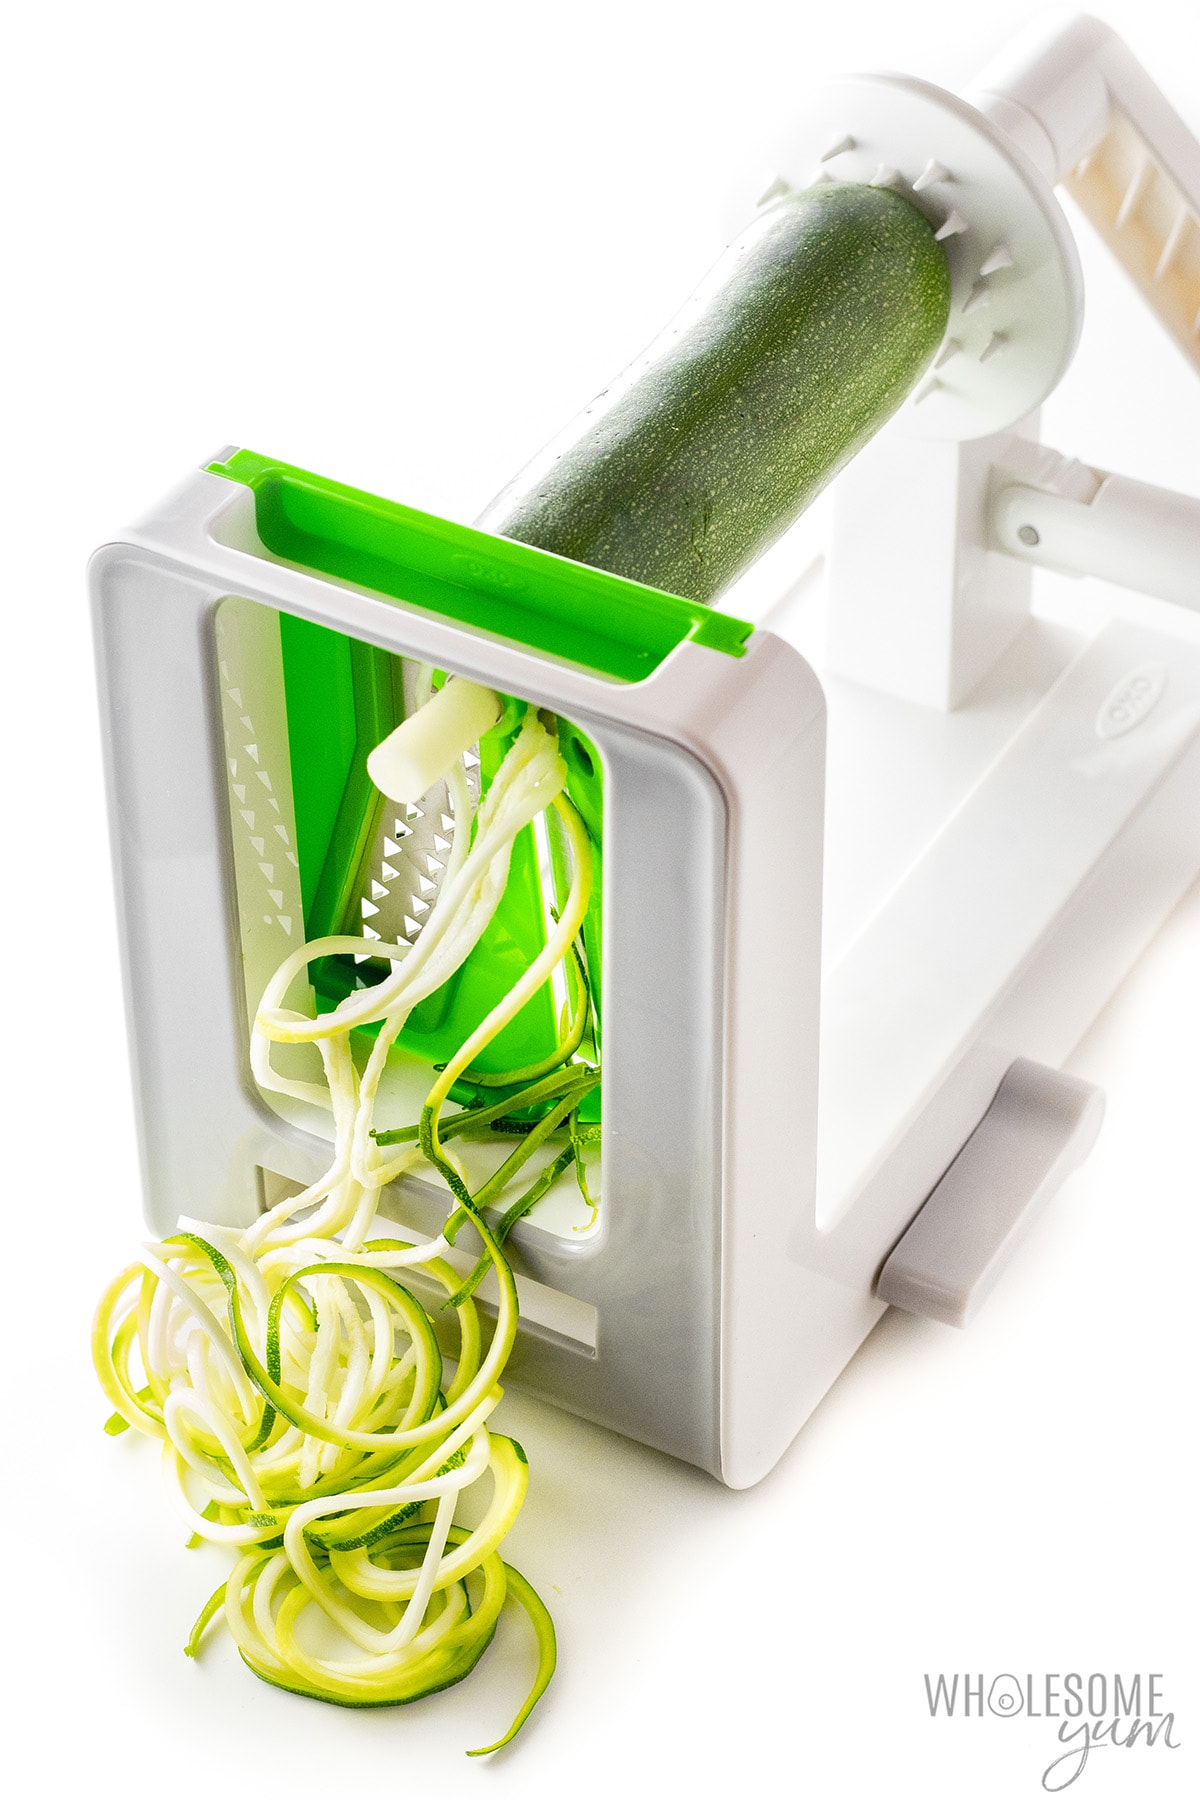 Zoodles in a spiralizer.